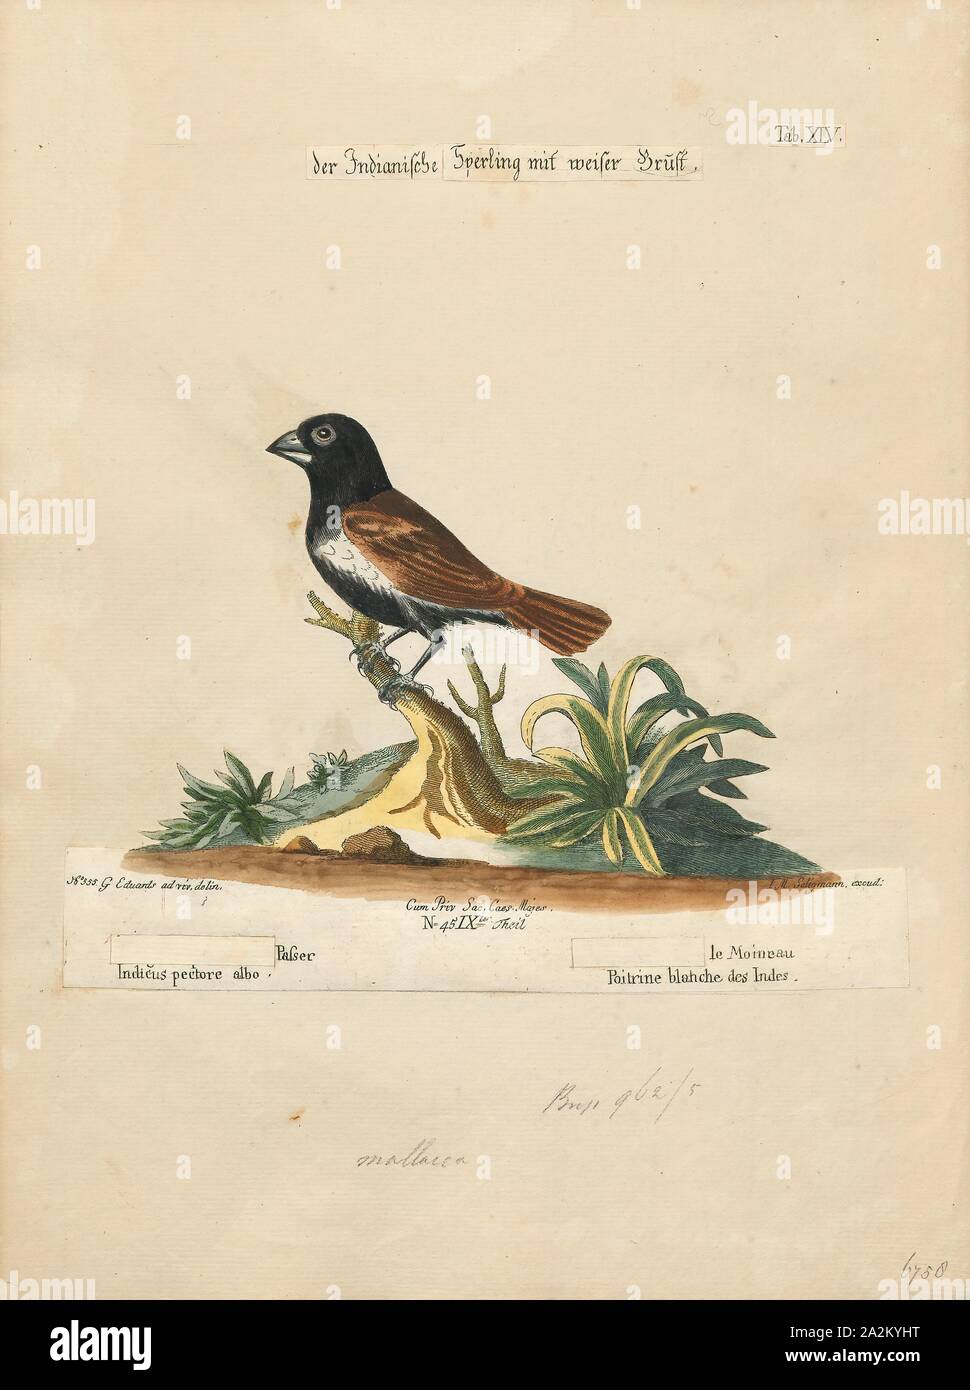 Amadina malacca, Print, Amadina is a genus of estrildid finches. Established by William John Swainson in 1827, 1700-1880 Stock Photo